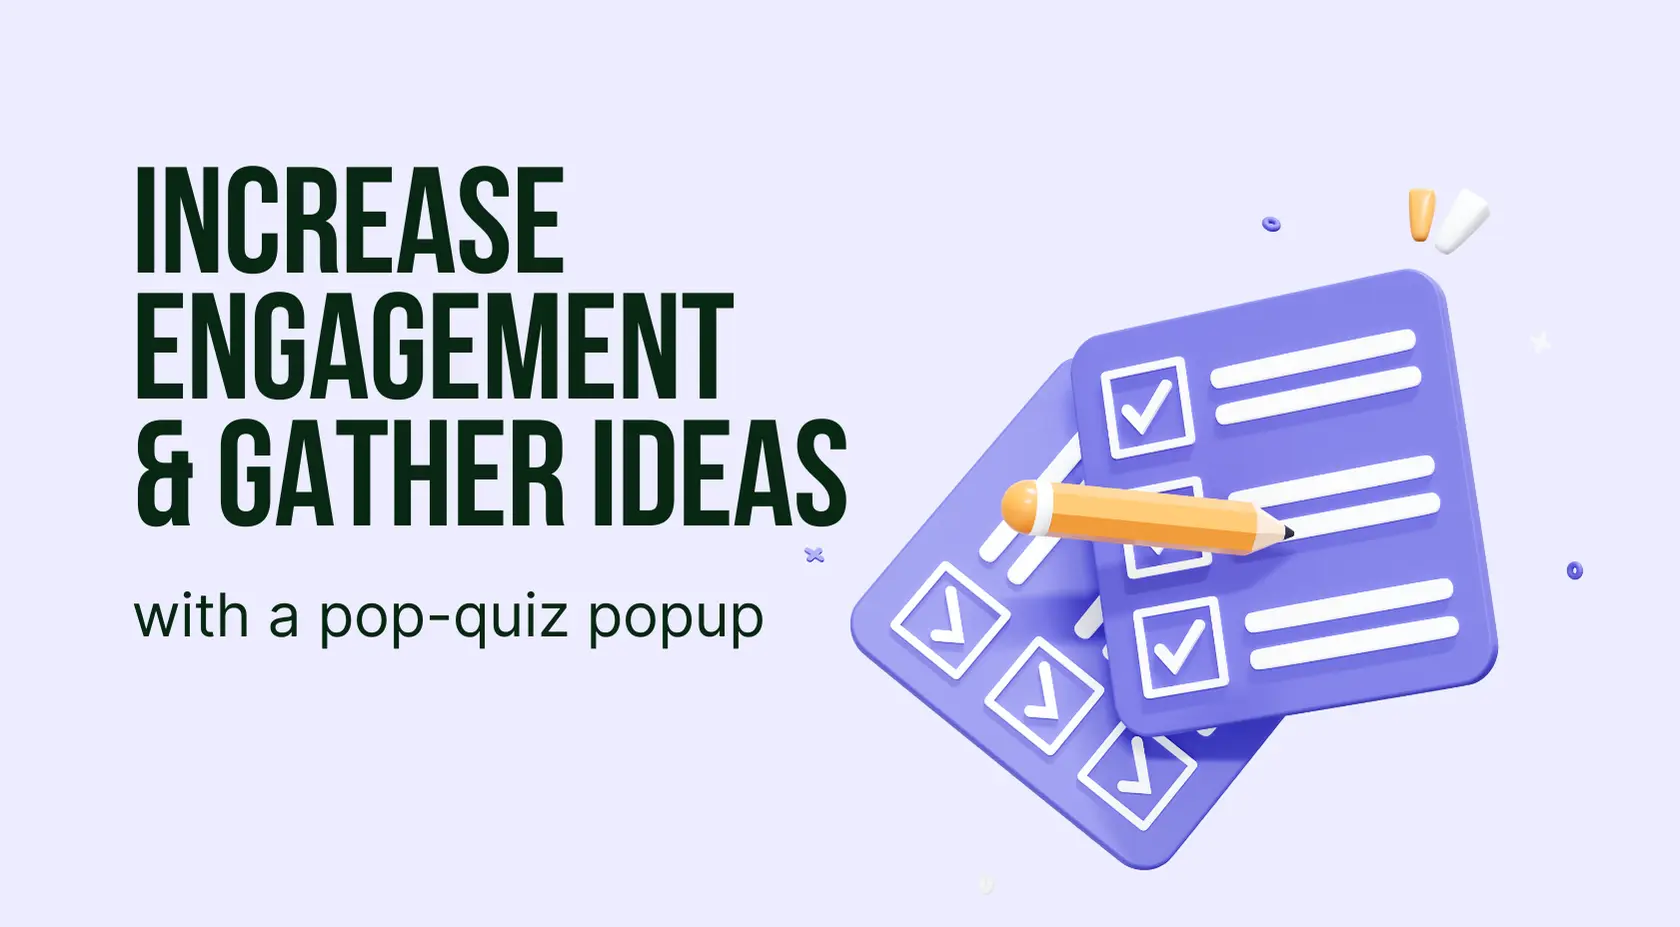 Increase Customer Engagement & Gather Ideas With a Pop-Quiz Popup